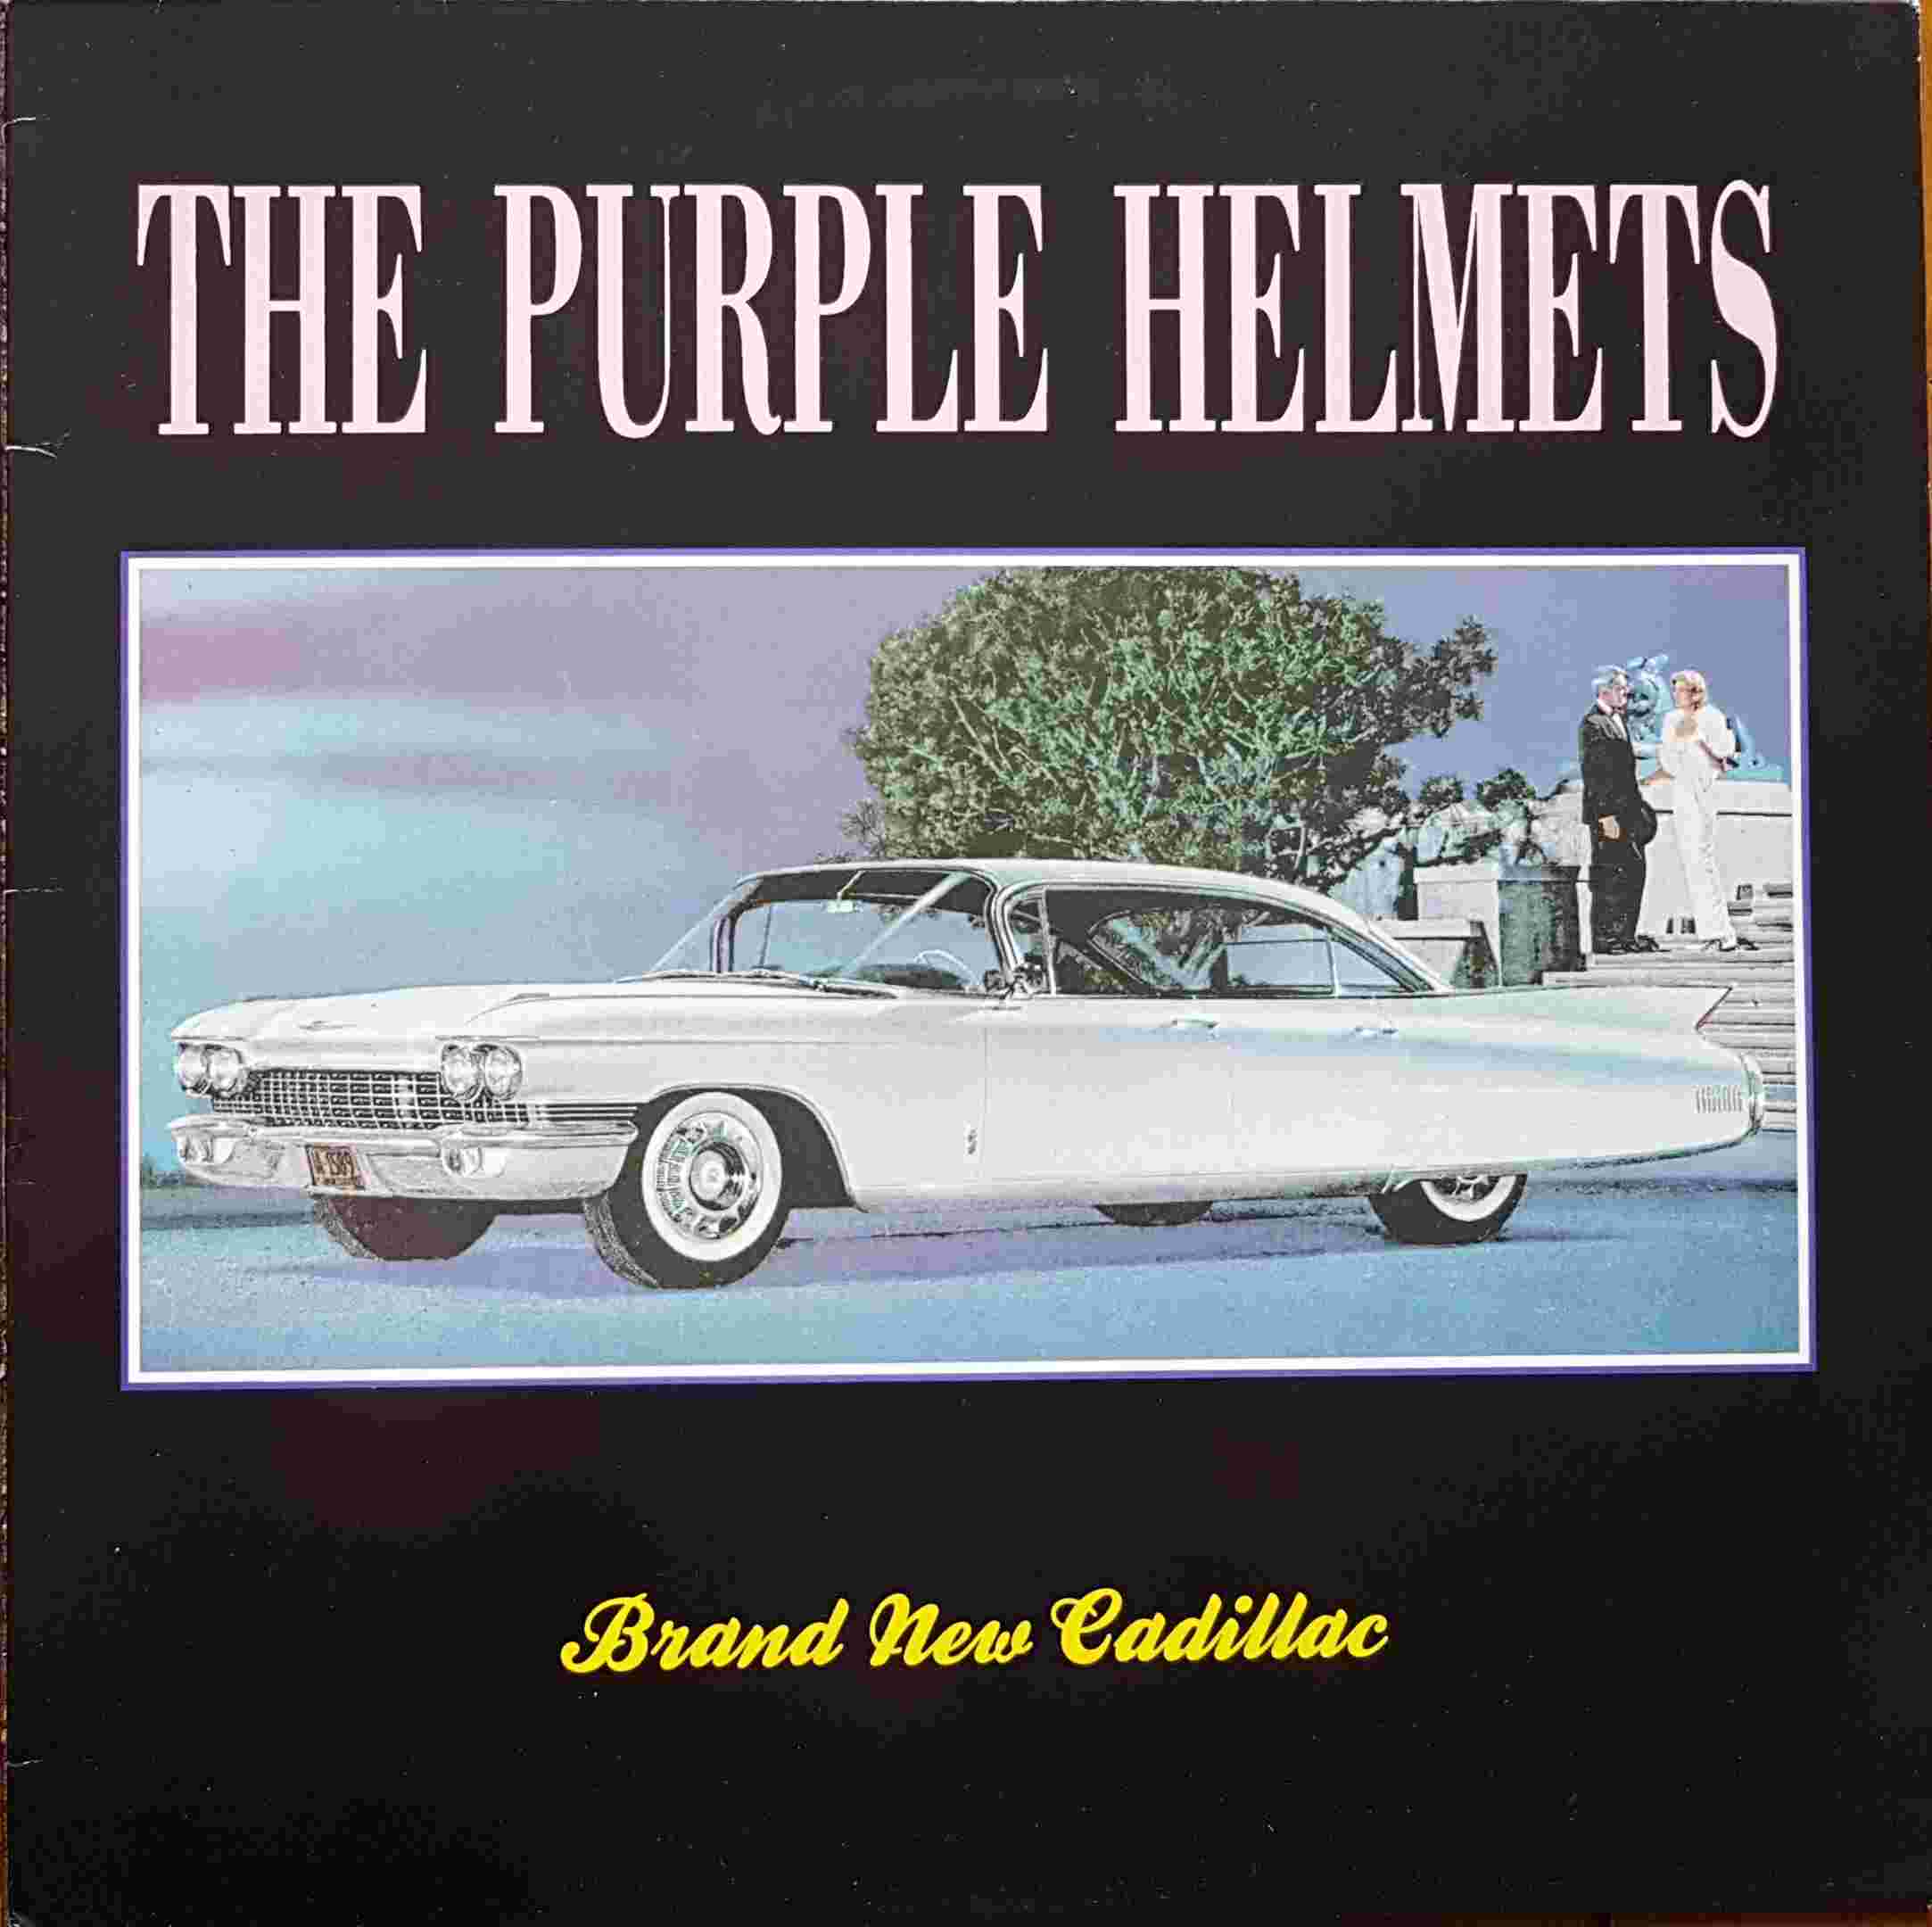 Picture of Brand new Cadillac by artist The Purple Helmets from The Stranglers 12inches